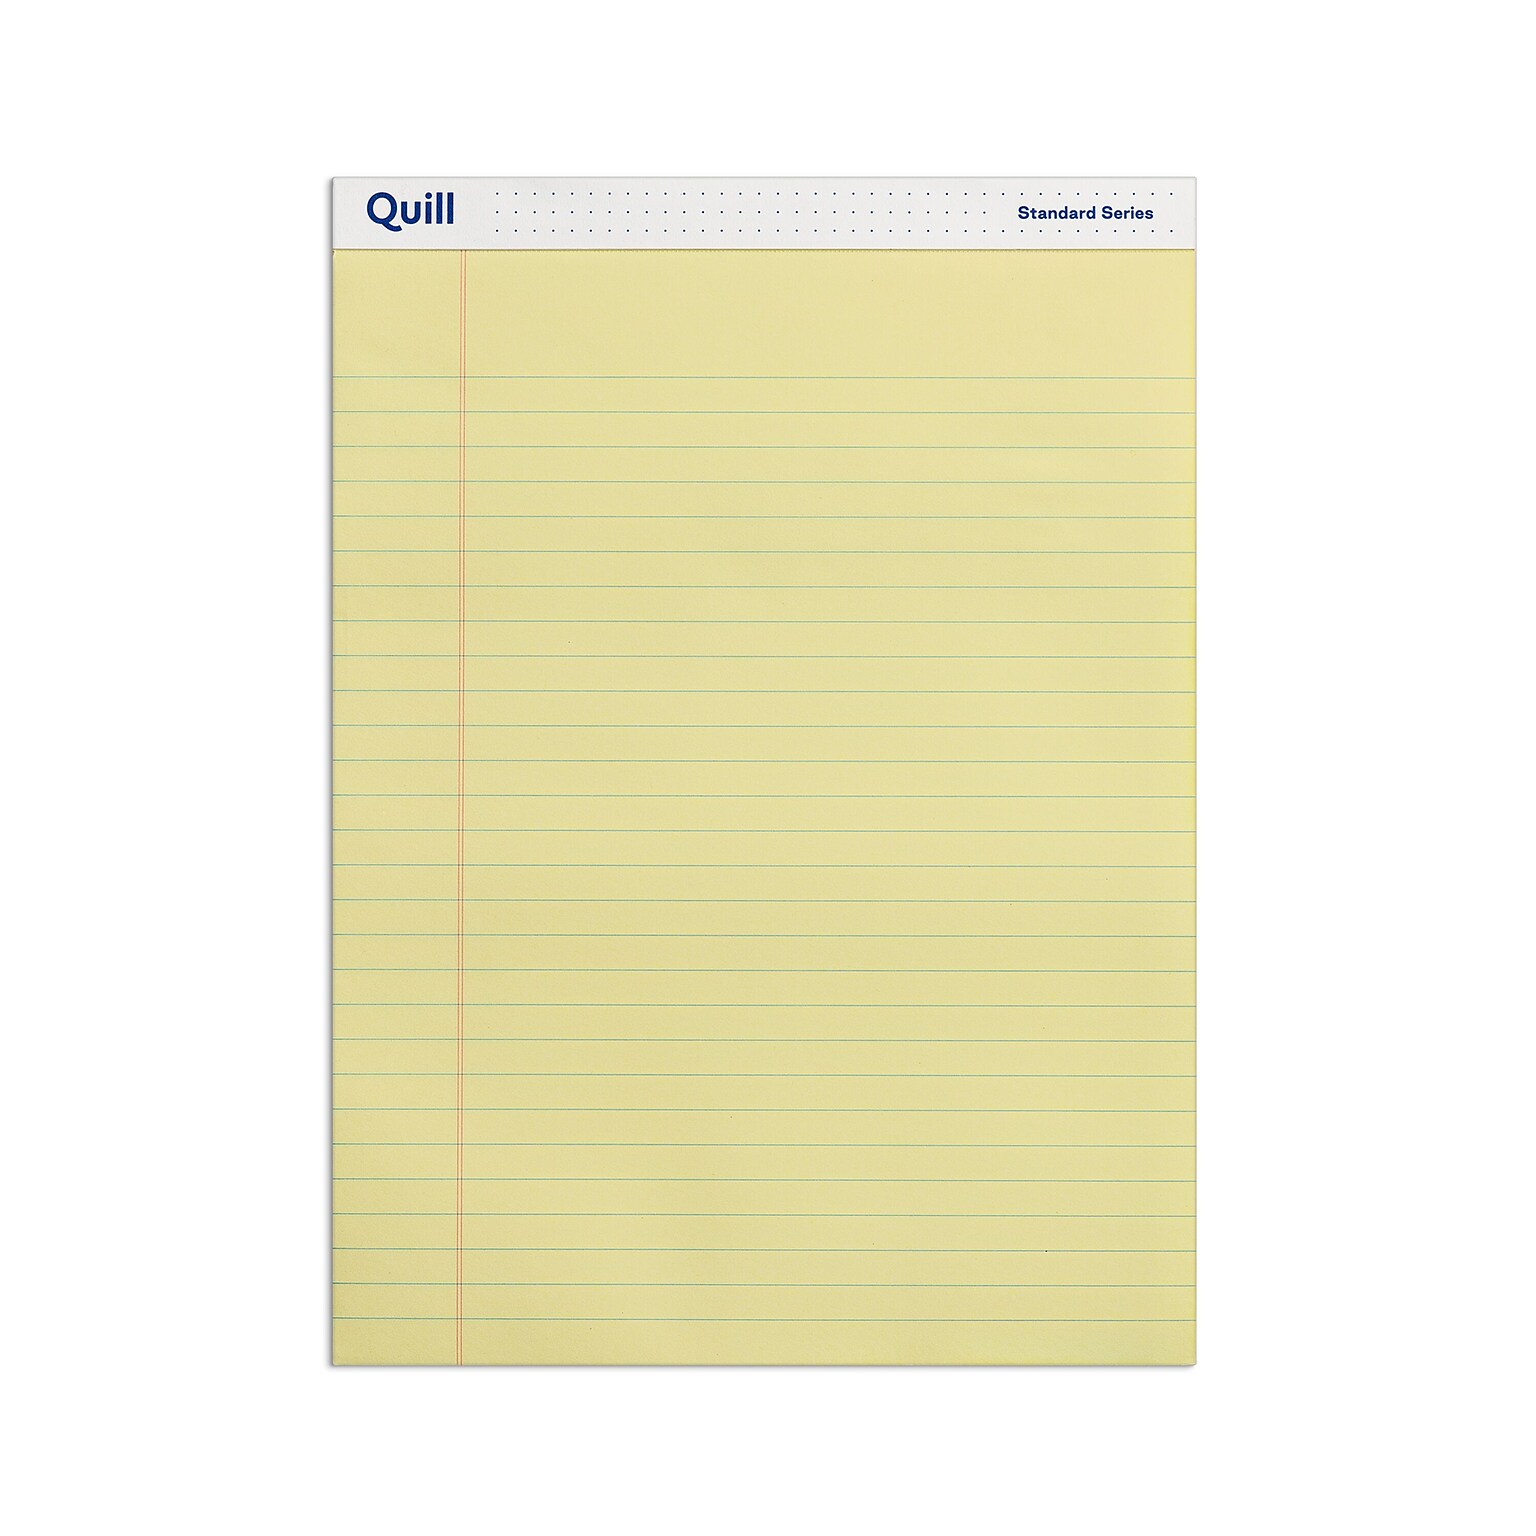 Quill Brand® Standard Series Legal Pad, 8-1/2 x 11, Wide Ruled, Canary Yellow, 50 Sheets/Pad, 12 Pads/Pack (740022)